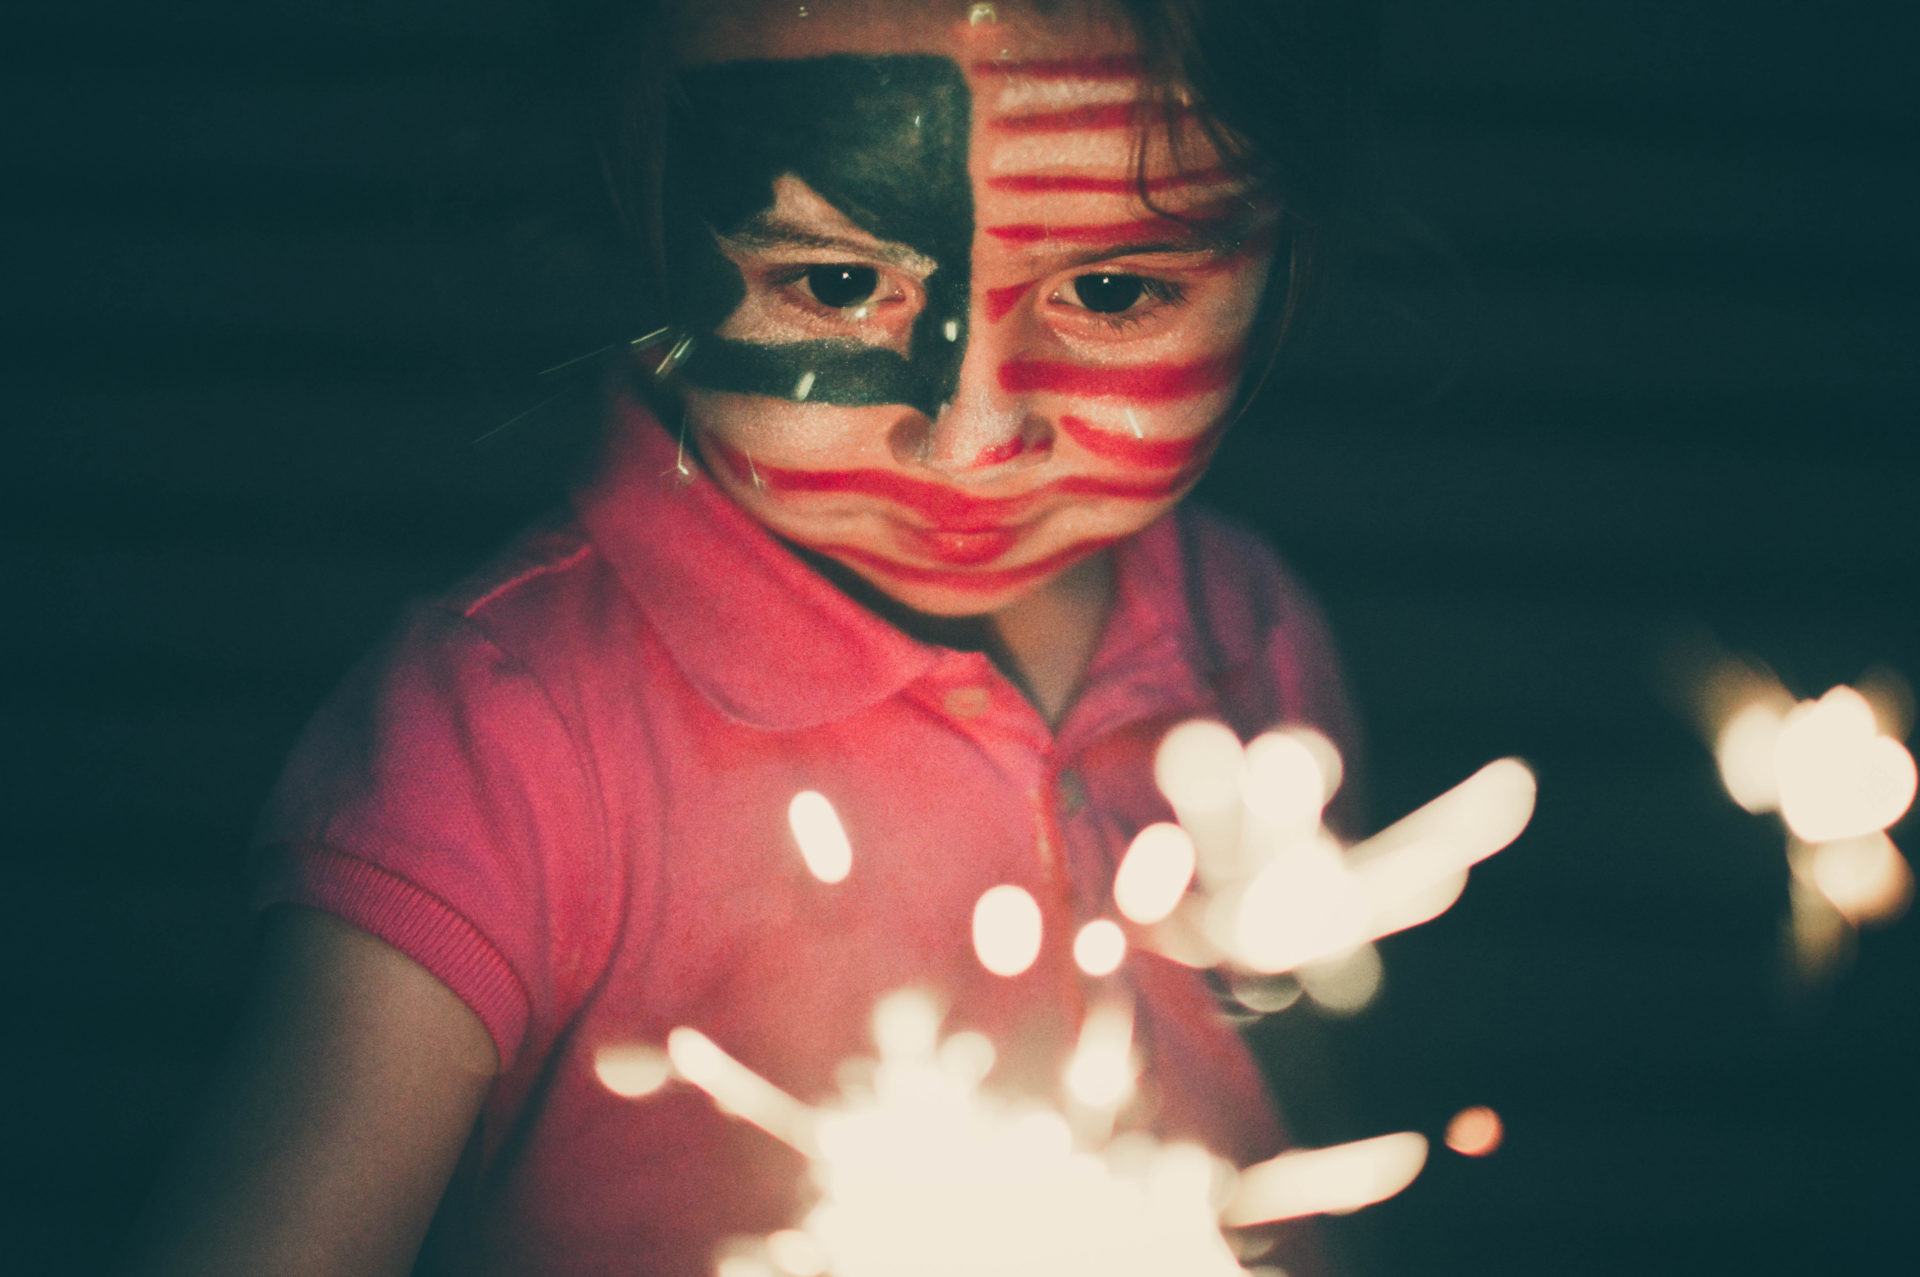 A young girl with her face painted red white and blue and a sparkler in her hand at night outside.